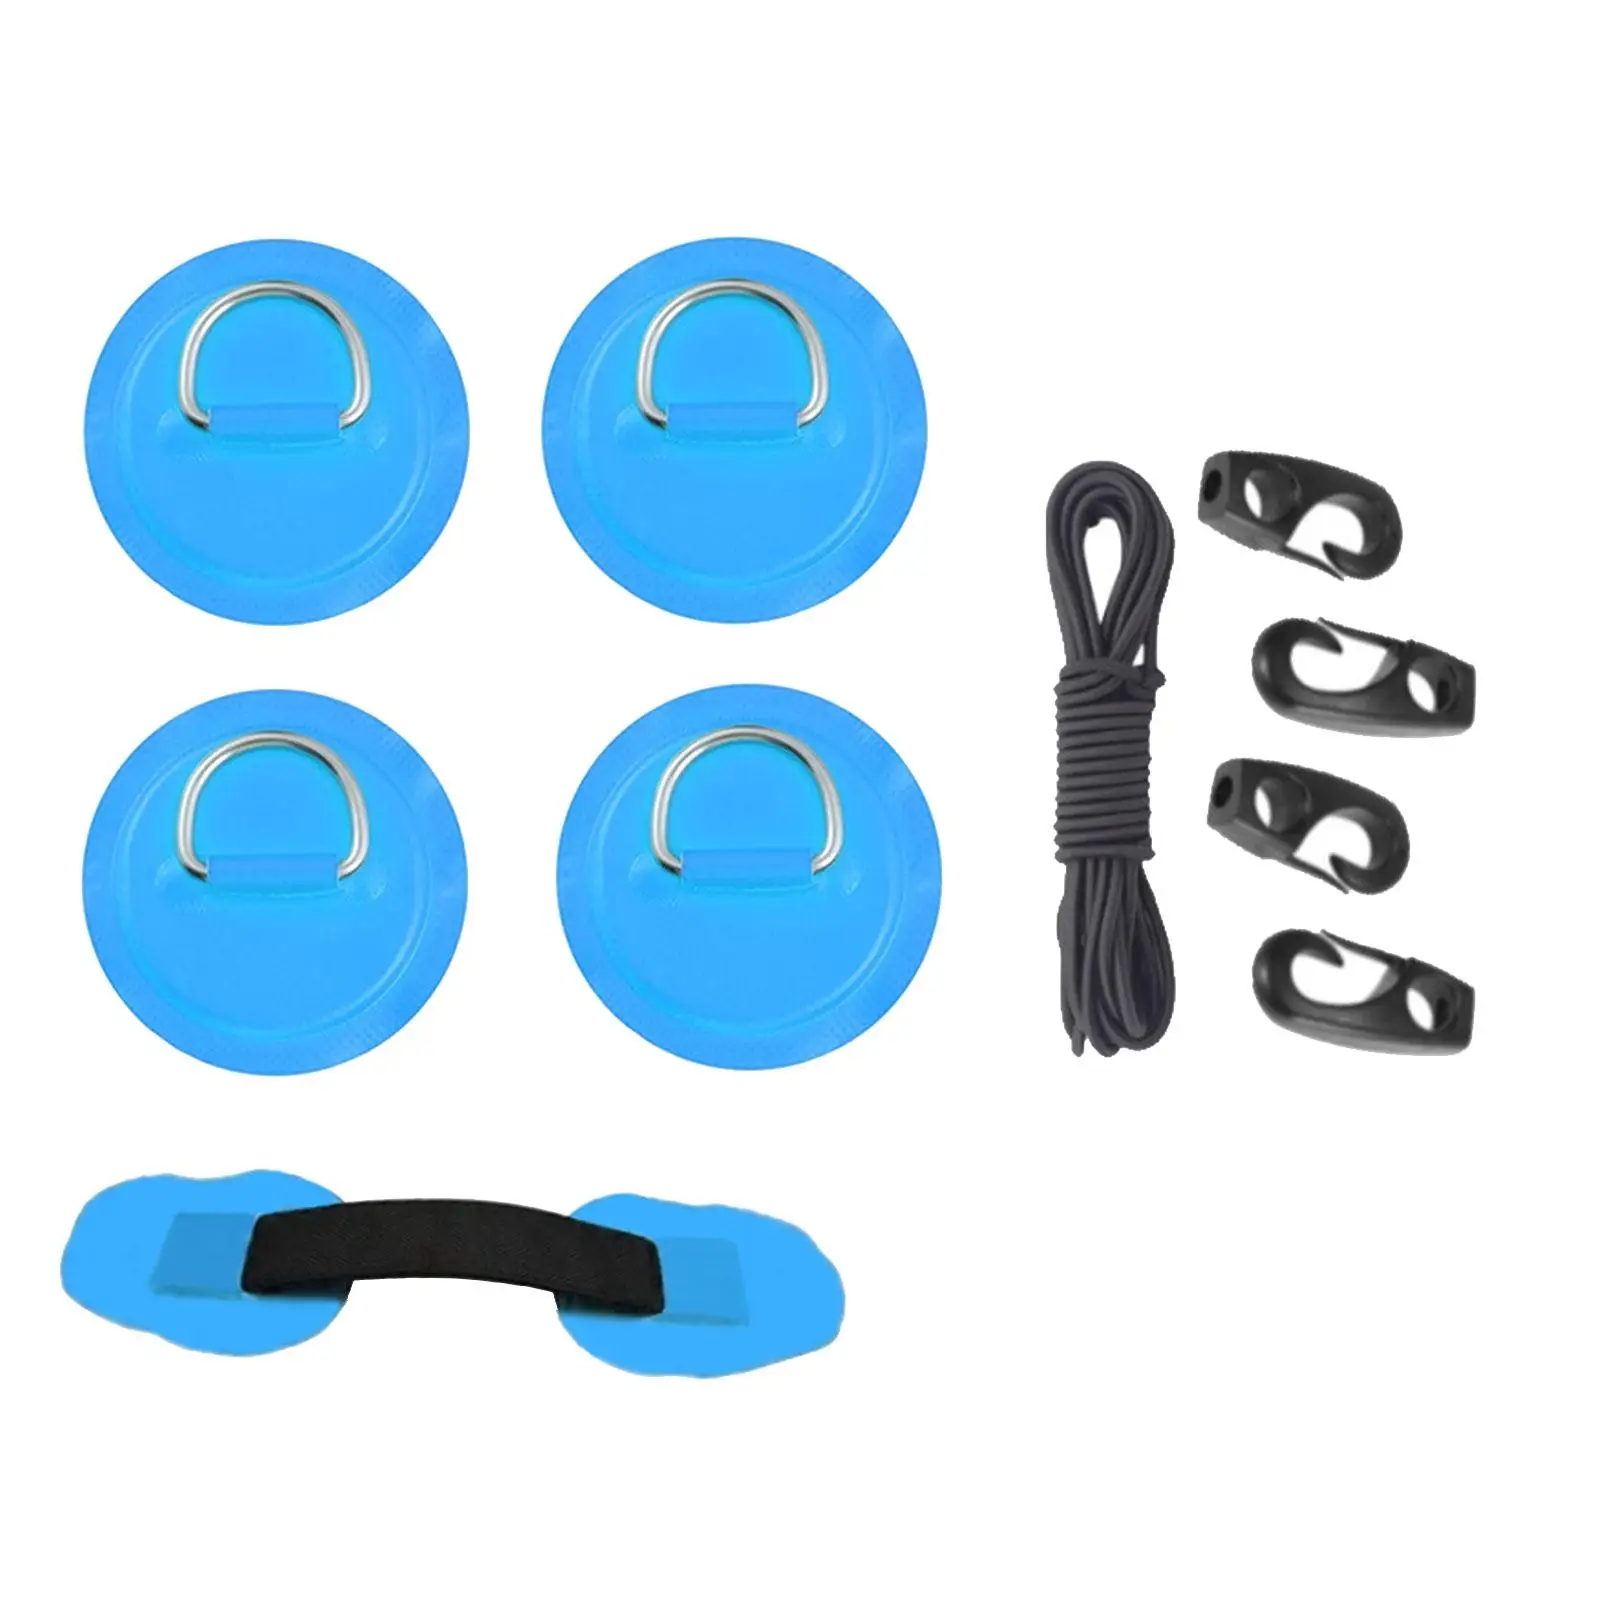 D Ring Pad Patch Kit PVC Stainless Steel Multifunctional Waterproof Elastic Rubber Bungee Rope 8cm Patch Sturdy for Kayak Dinghy